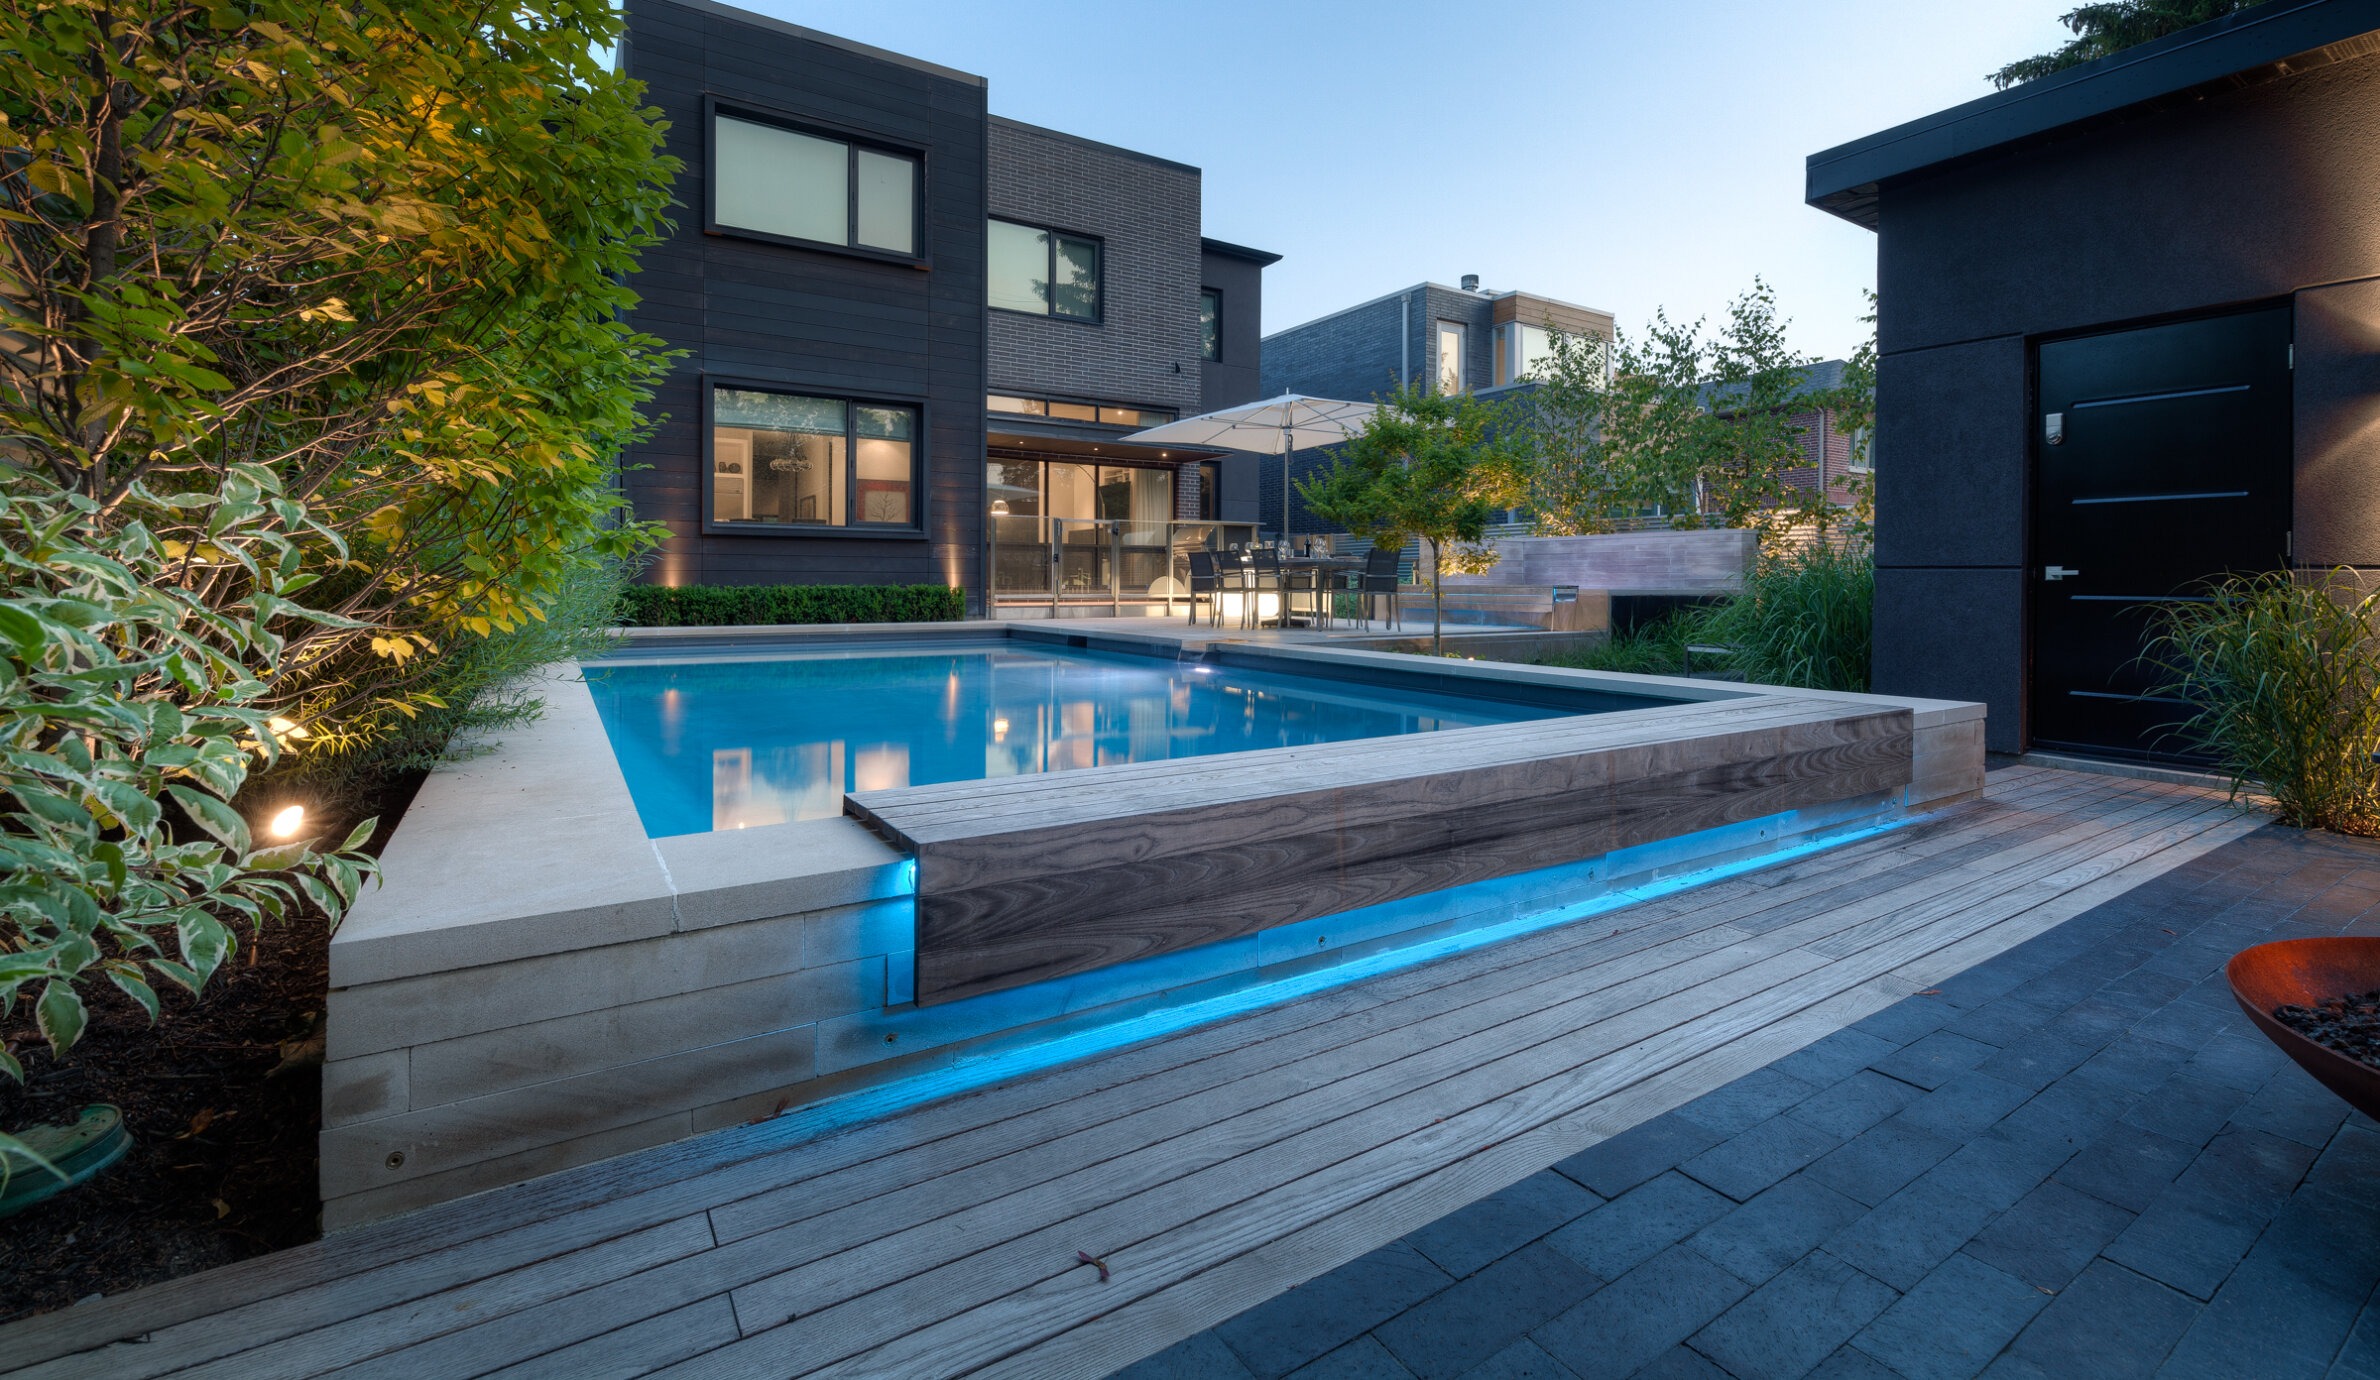 Modern backyard with a rectangular swimming pool featuring underwater lighting. Wooden decking, landscaped garden, contemporary house with outdoor furniture visible in twilight.